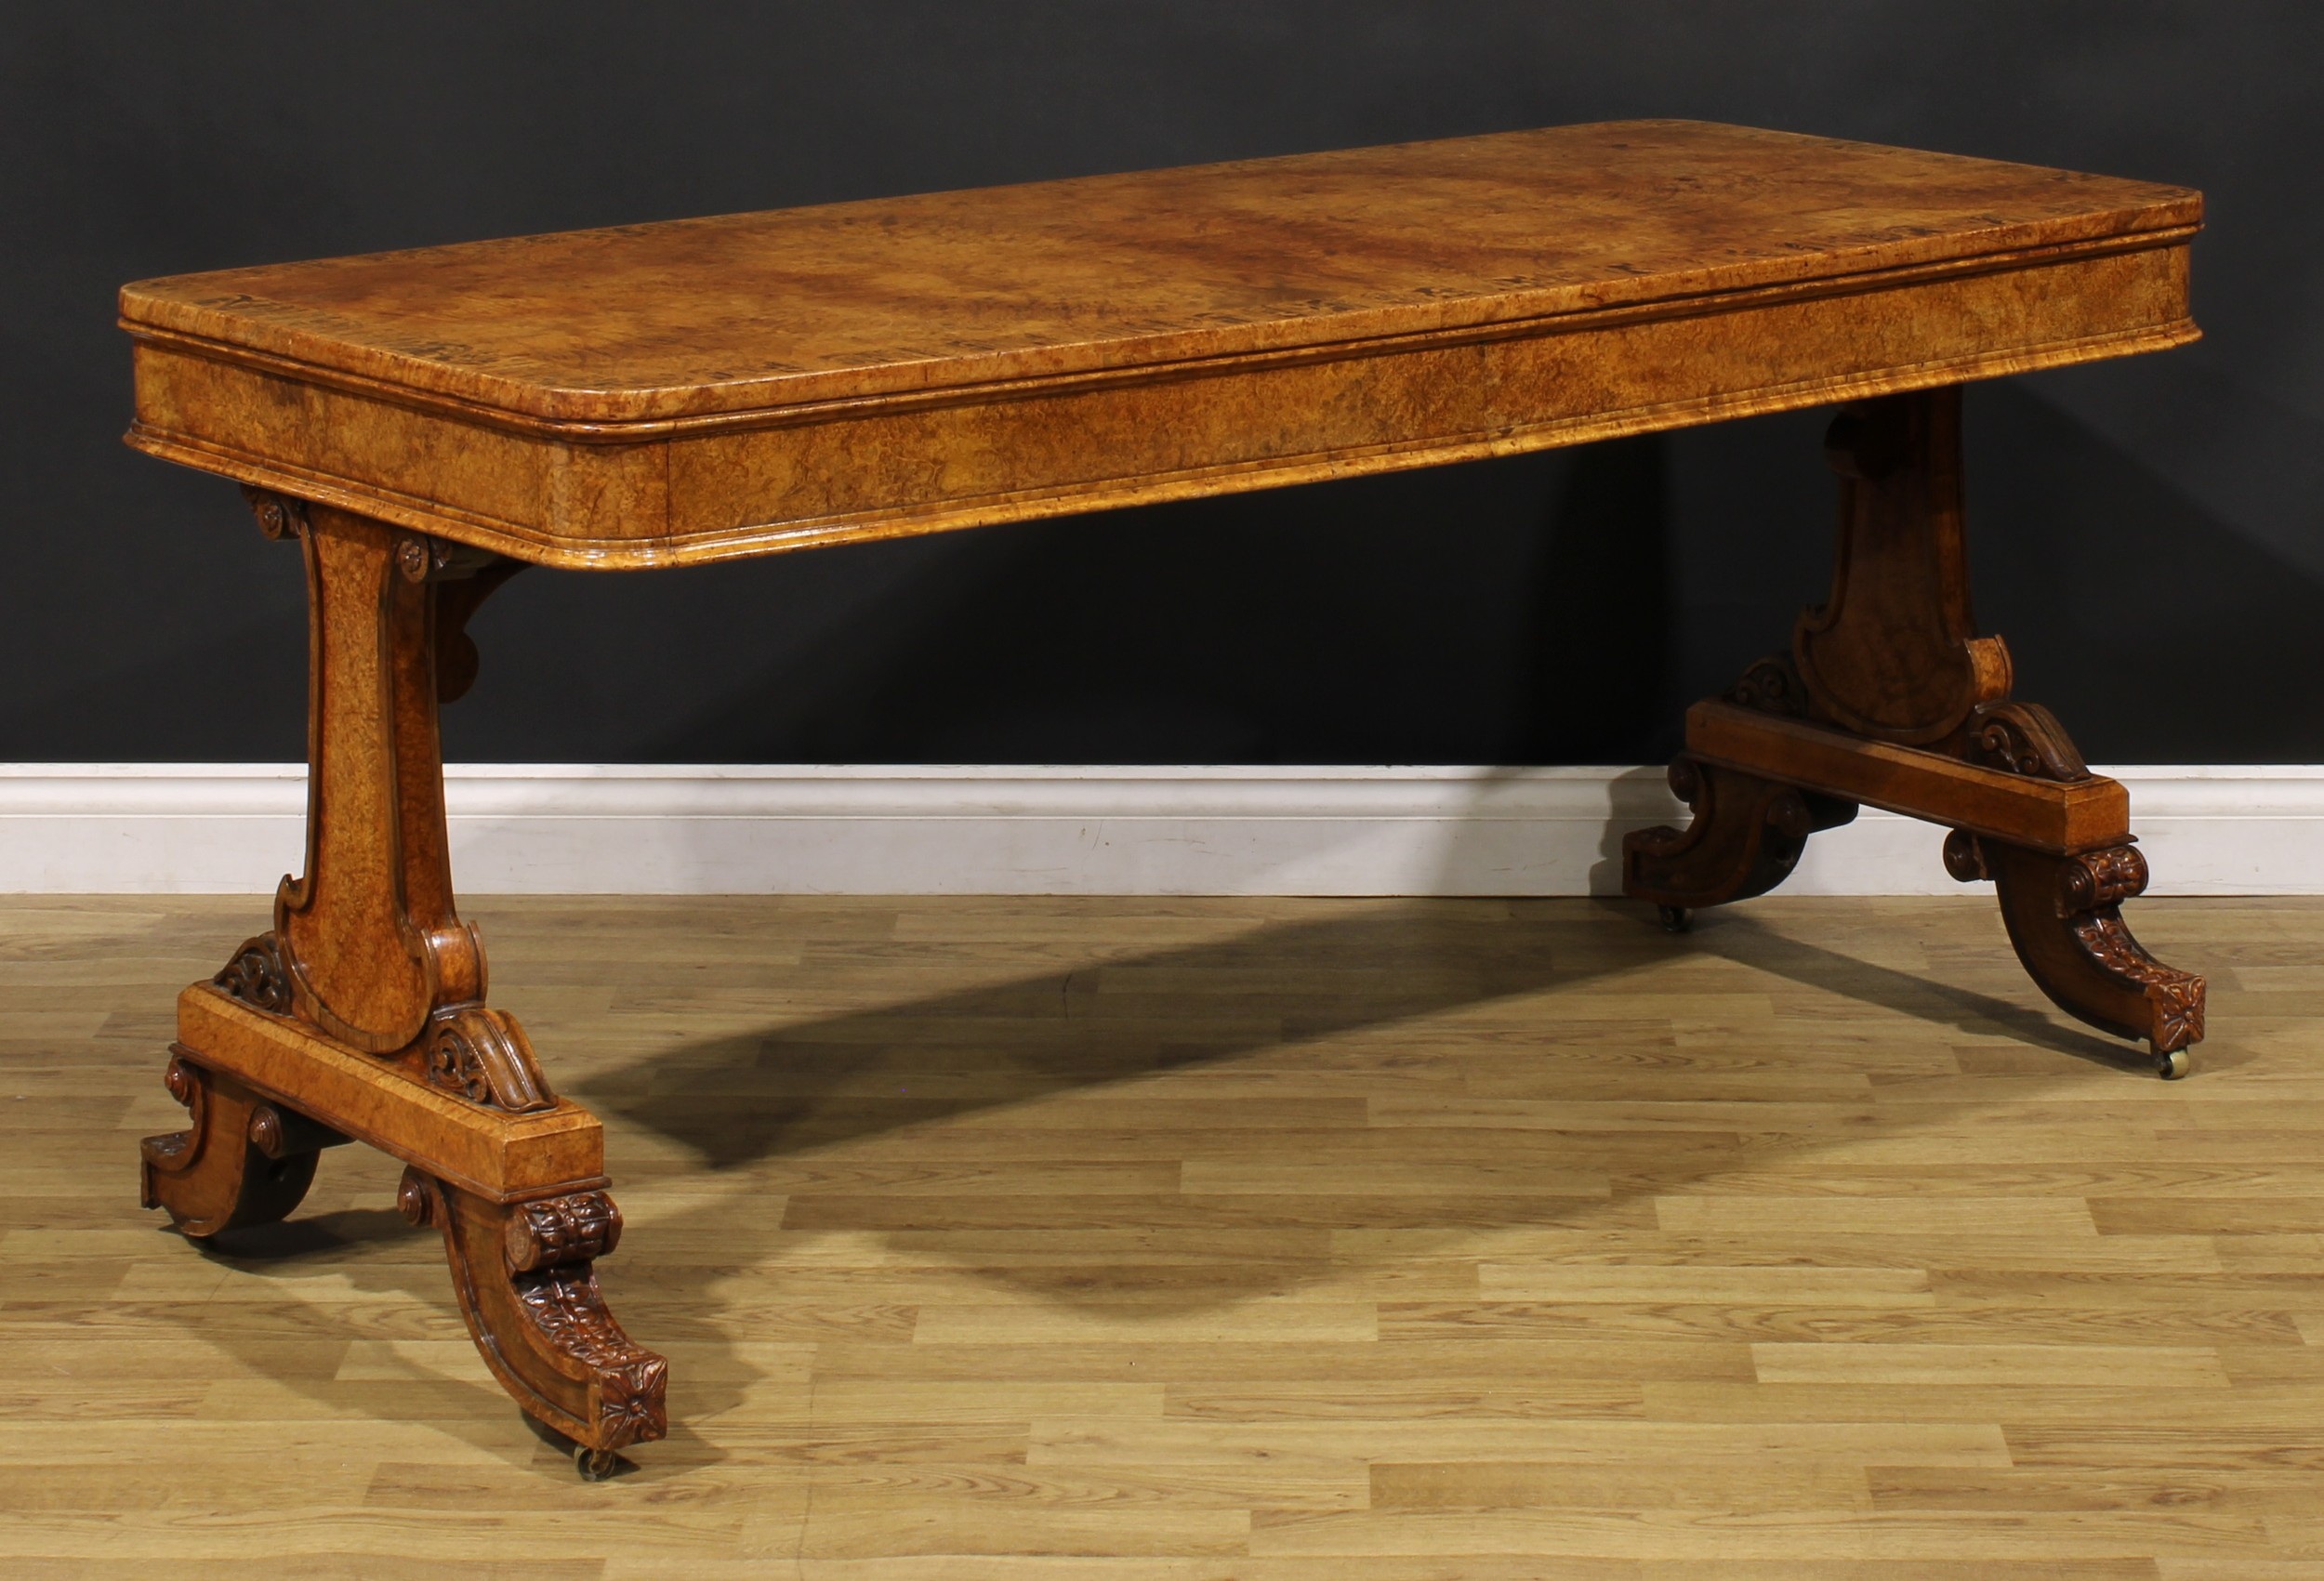 A William IV burr walnut and zebrawood marquetry library table, in the manner of George Bullock, - Image 3 of 6